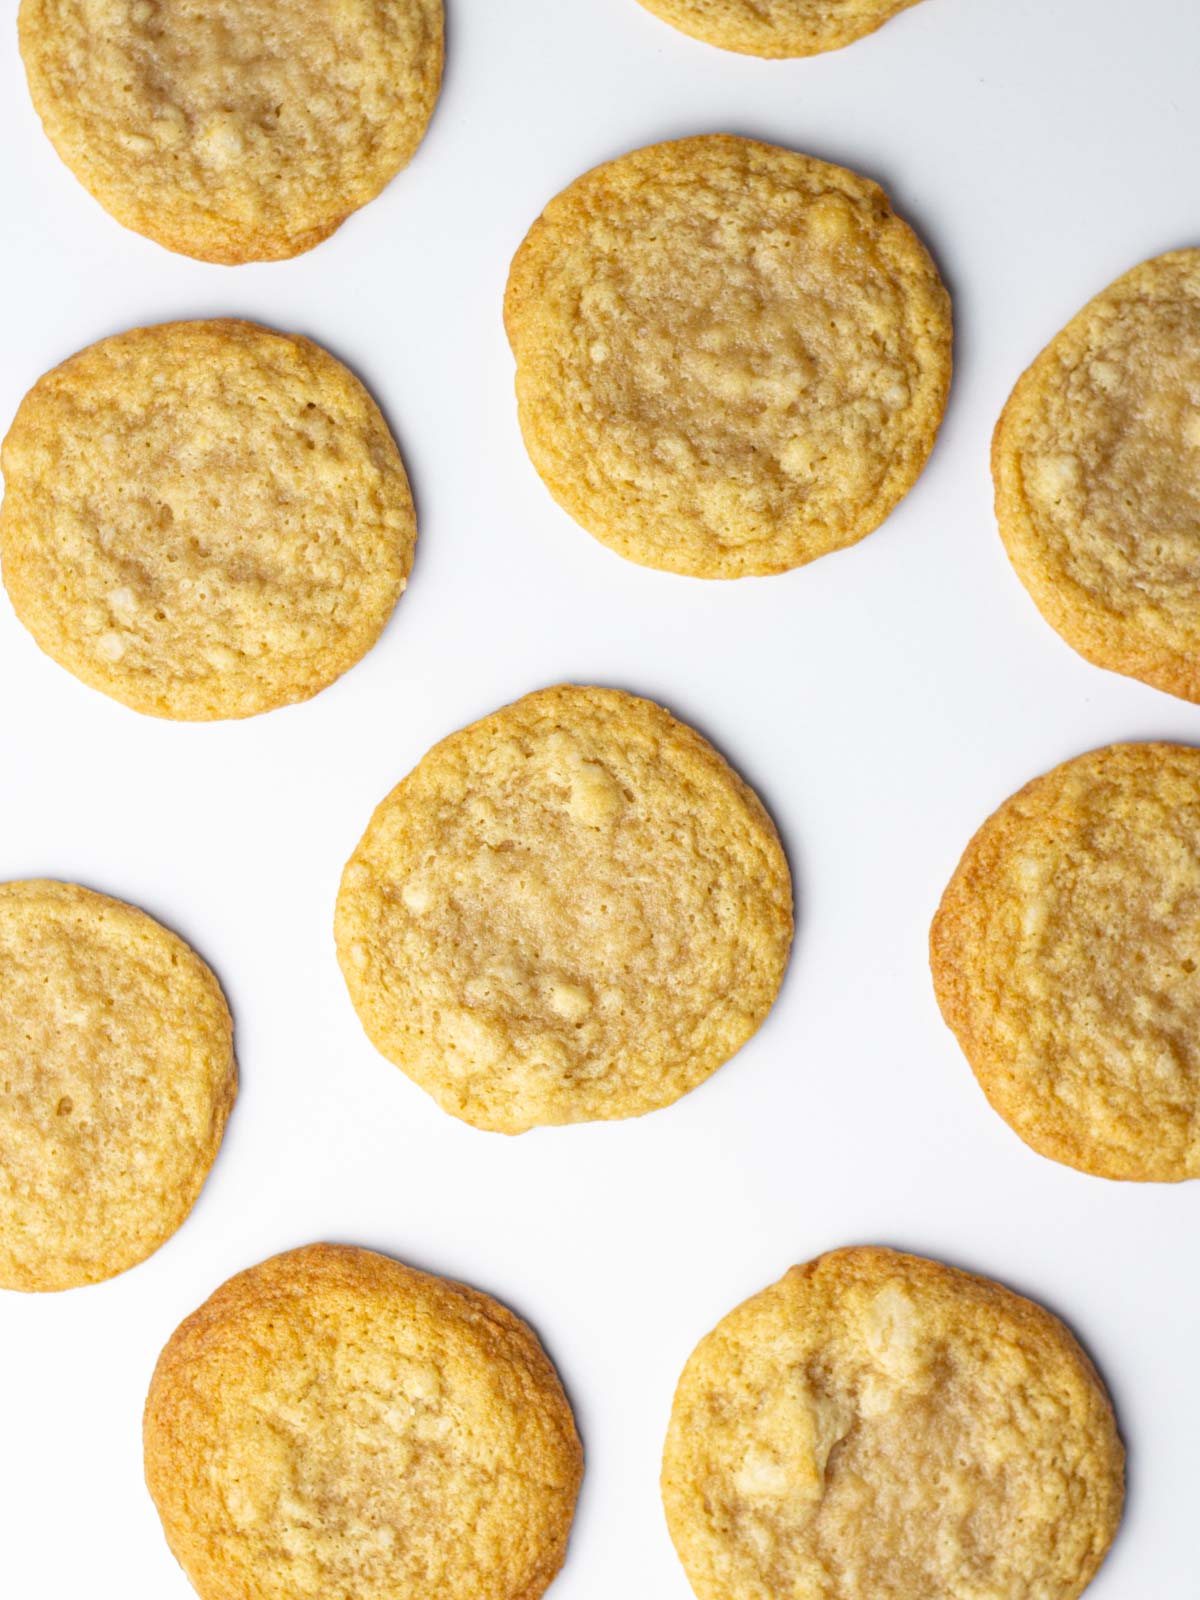 Baked beer cookies without icing spread around a white surface.